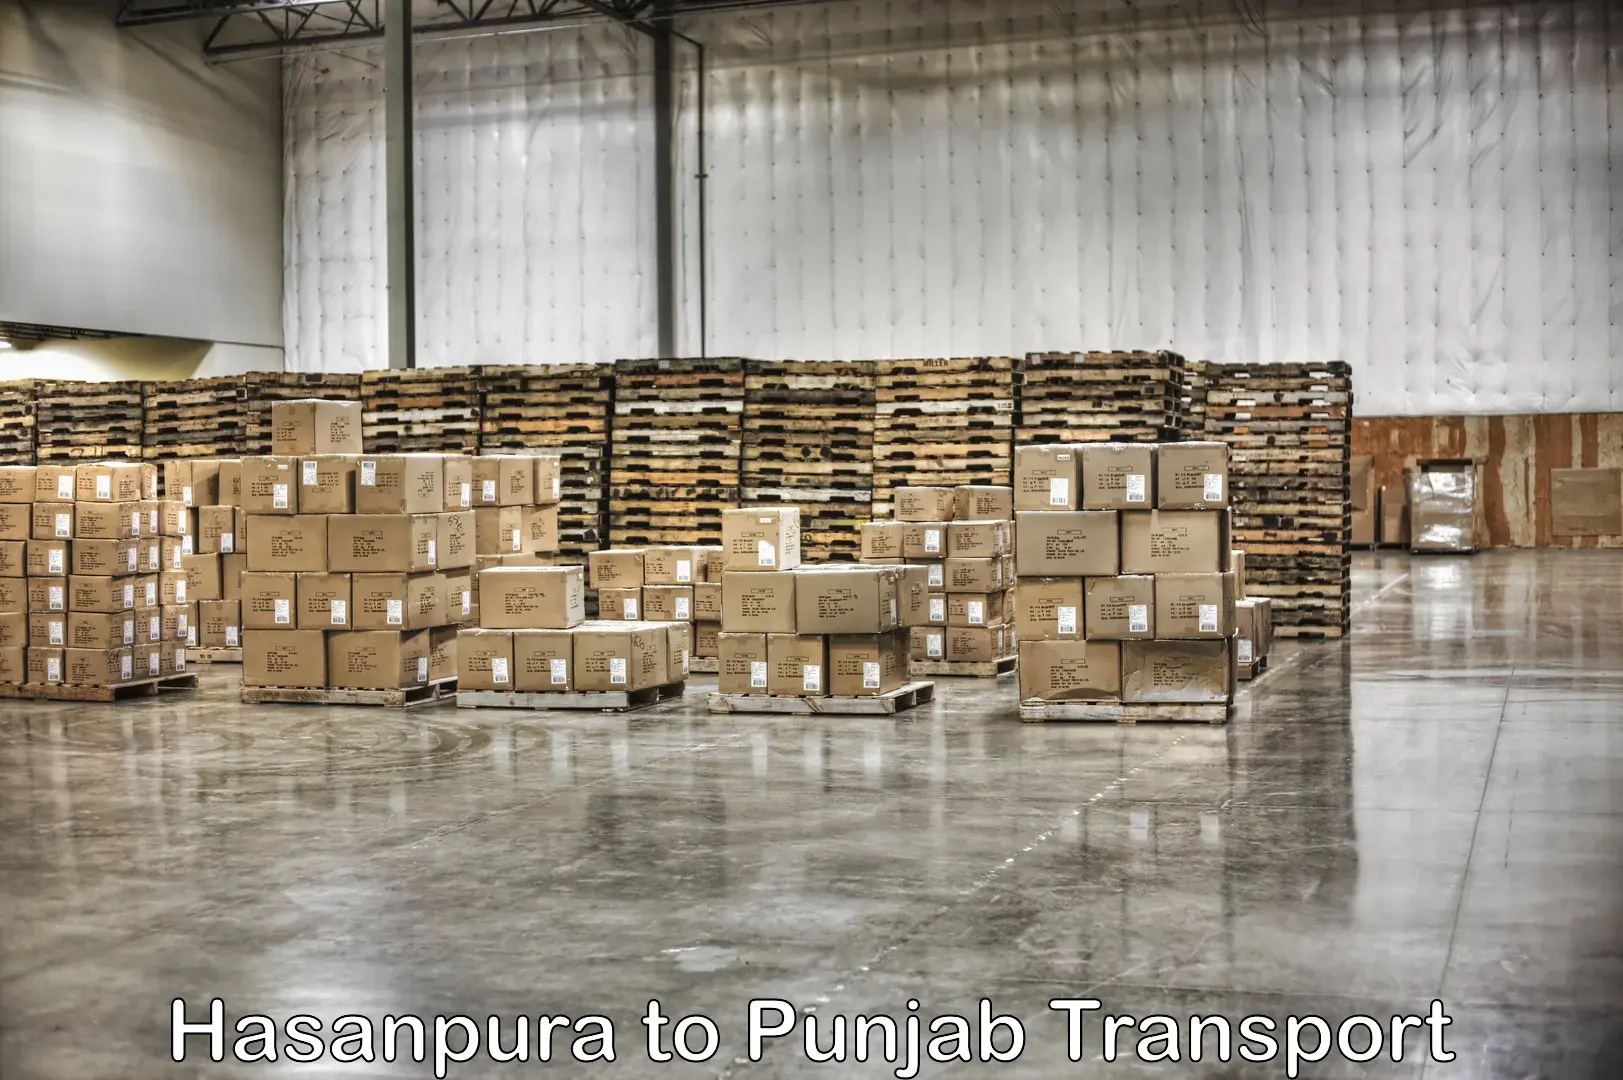 Container transport service Hasanpura to Pathankot